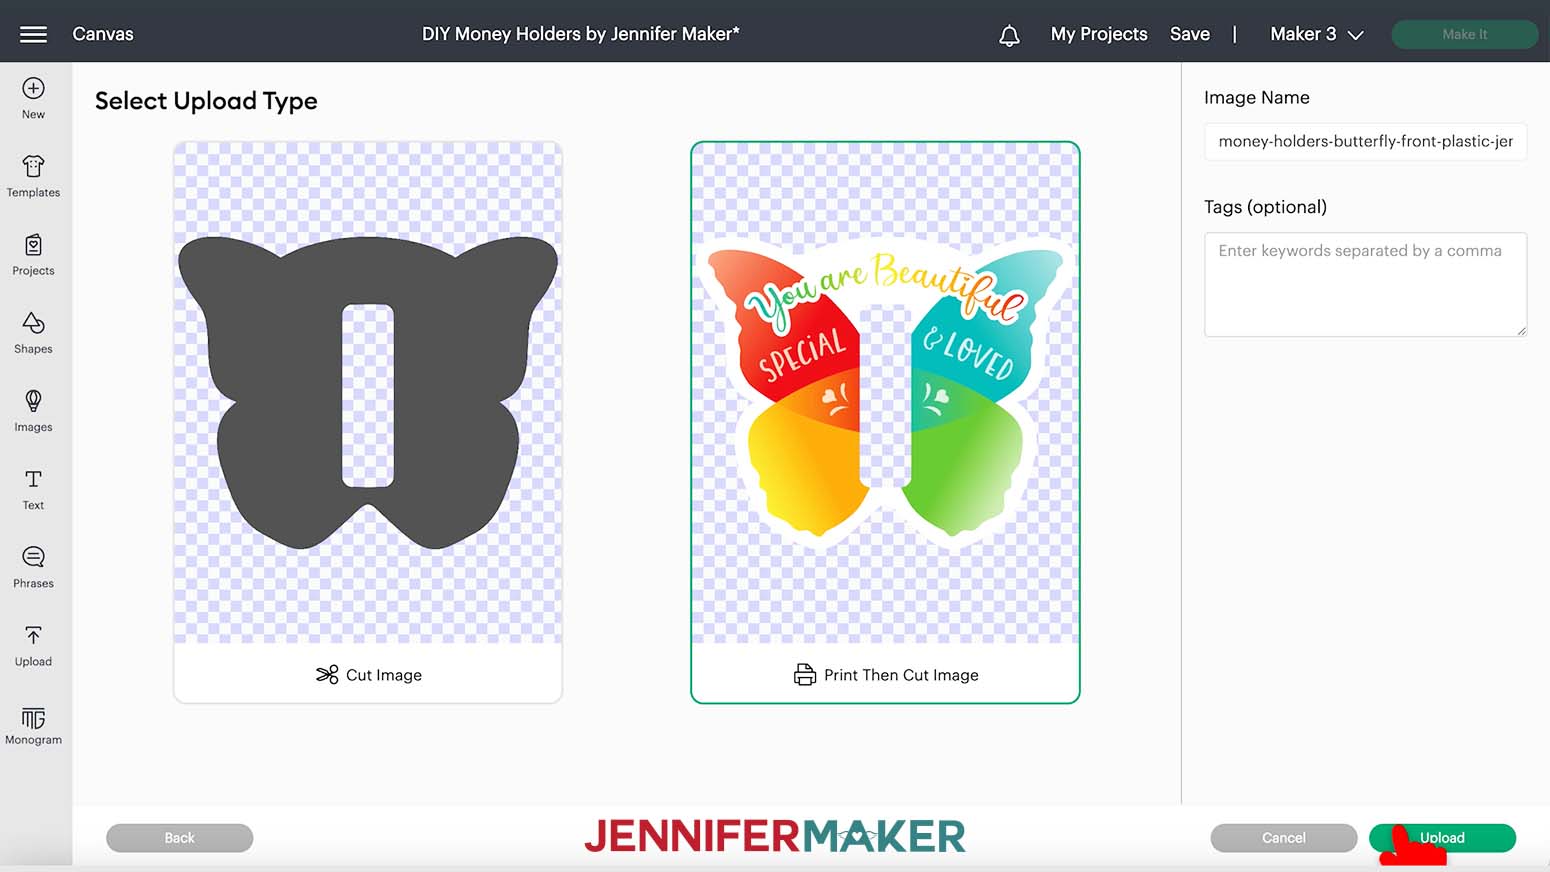 The Select Upload Type screen in Cricut Design Space showing the butterfly DIY money holders design. Print Then Cut Image is selected and the pointer is hovering over the Upload button.